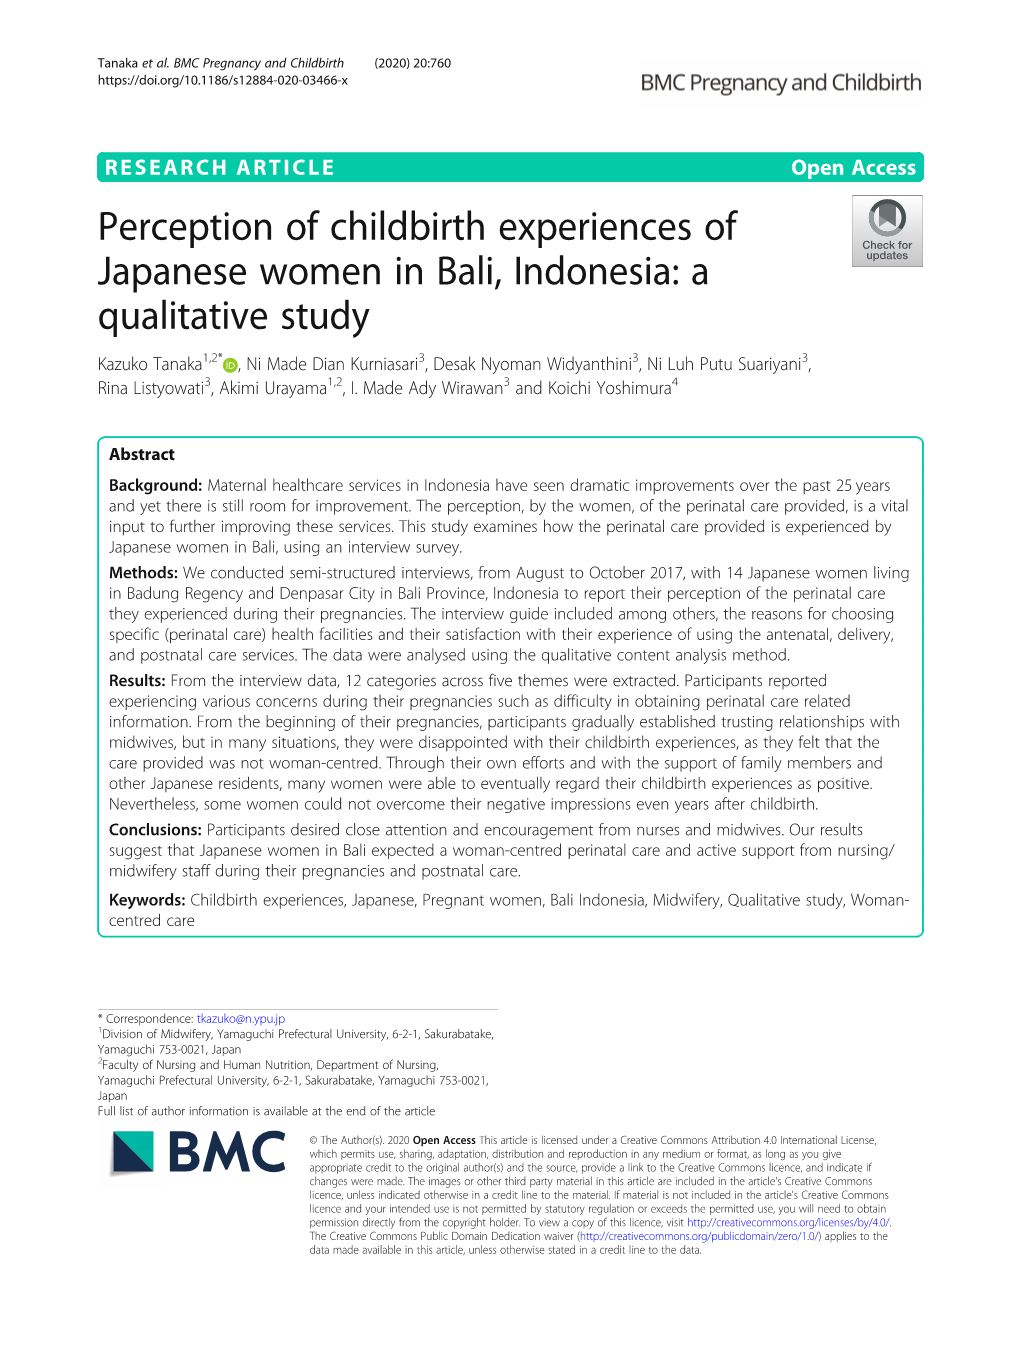 Perception of Childbirth Experiences of Japanese Women in Bali, Indonesia